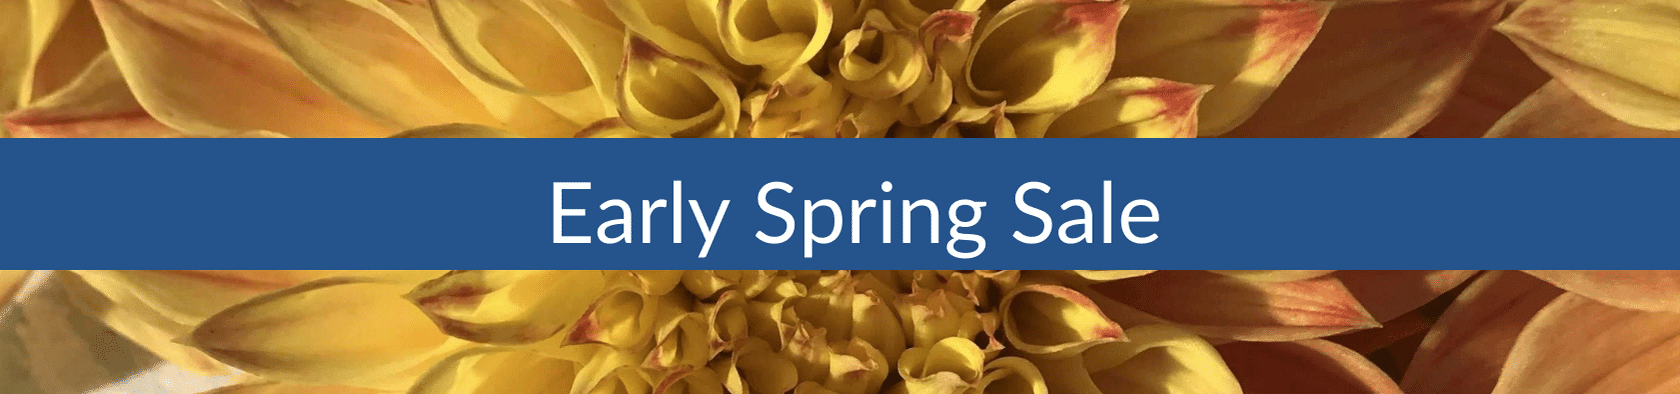 Early Spring Sale (1).png__PID:8dc11f75-30c0-4c76-a8b5-0c75fc3809f4